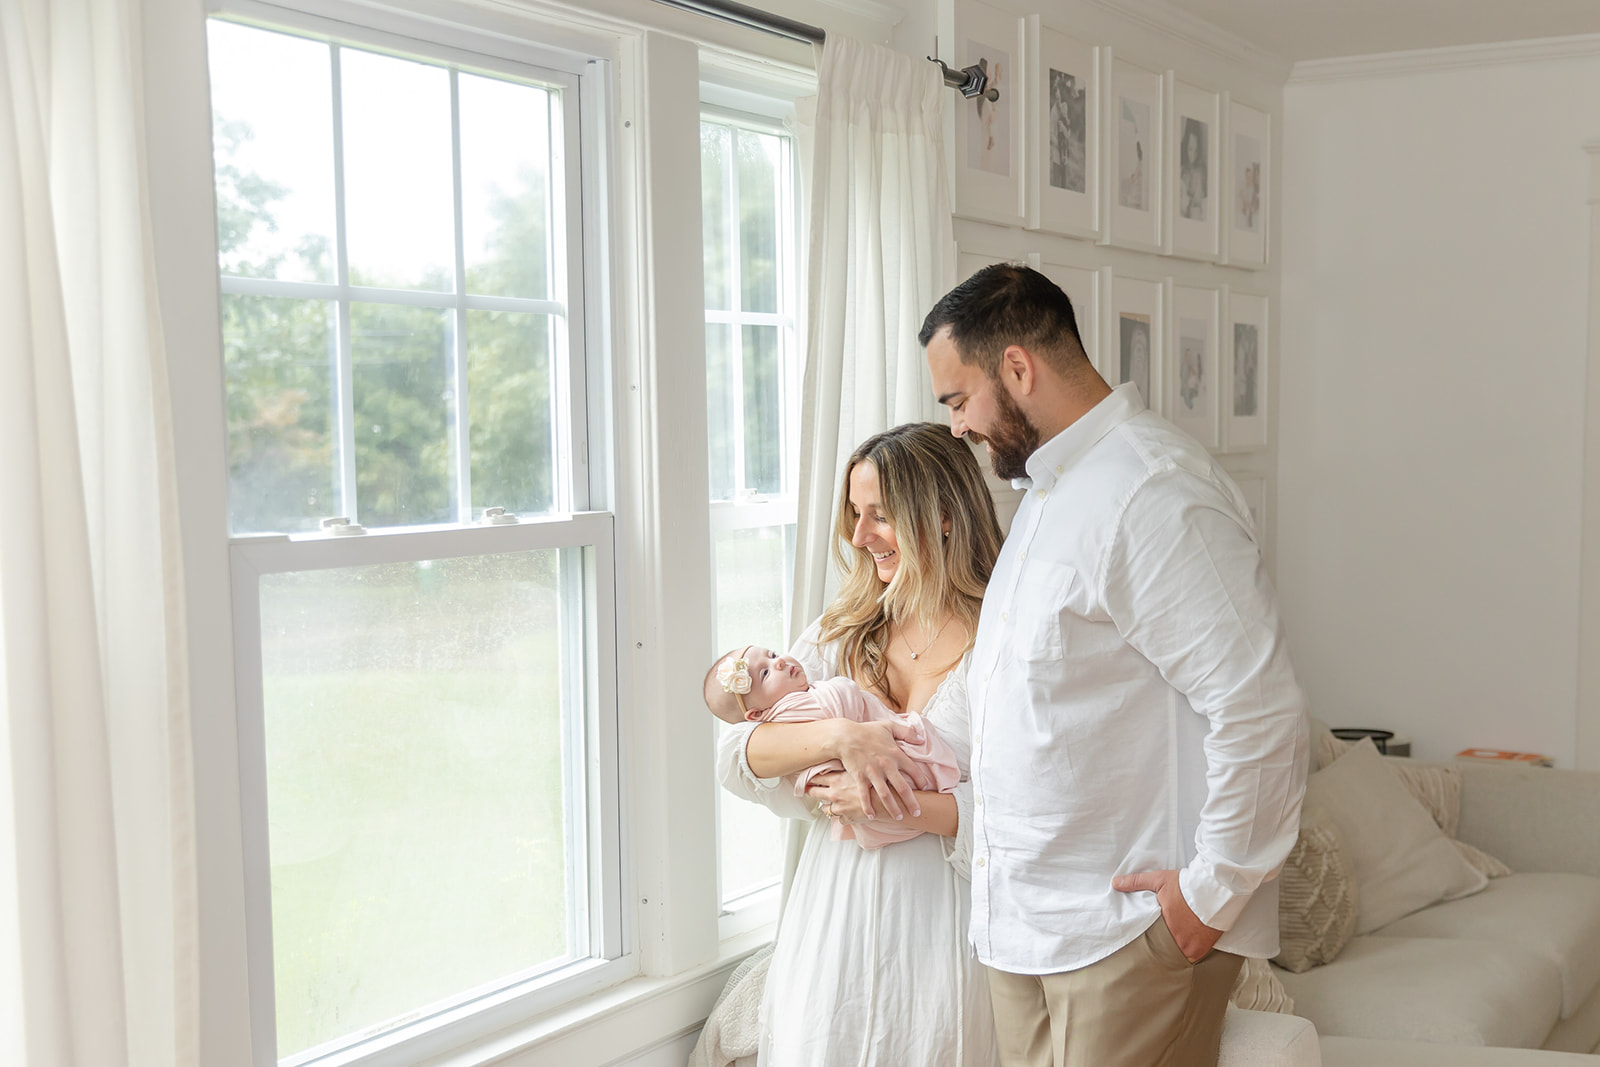 A mom and dad stand in a window with their newborn baby daughter in mom's arms